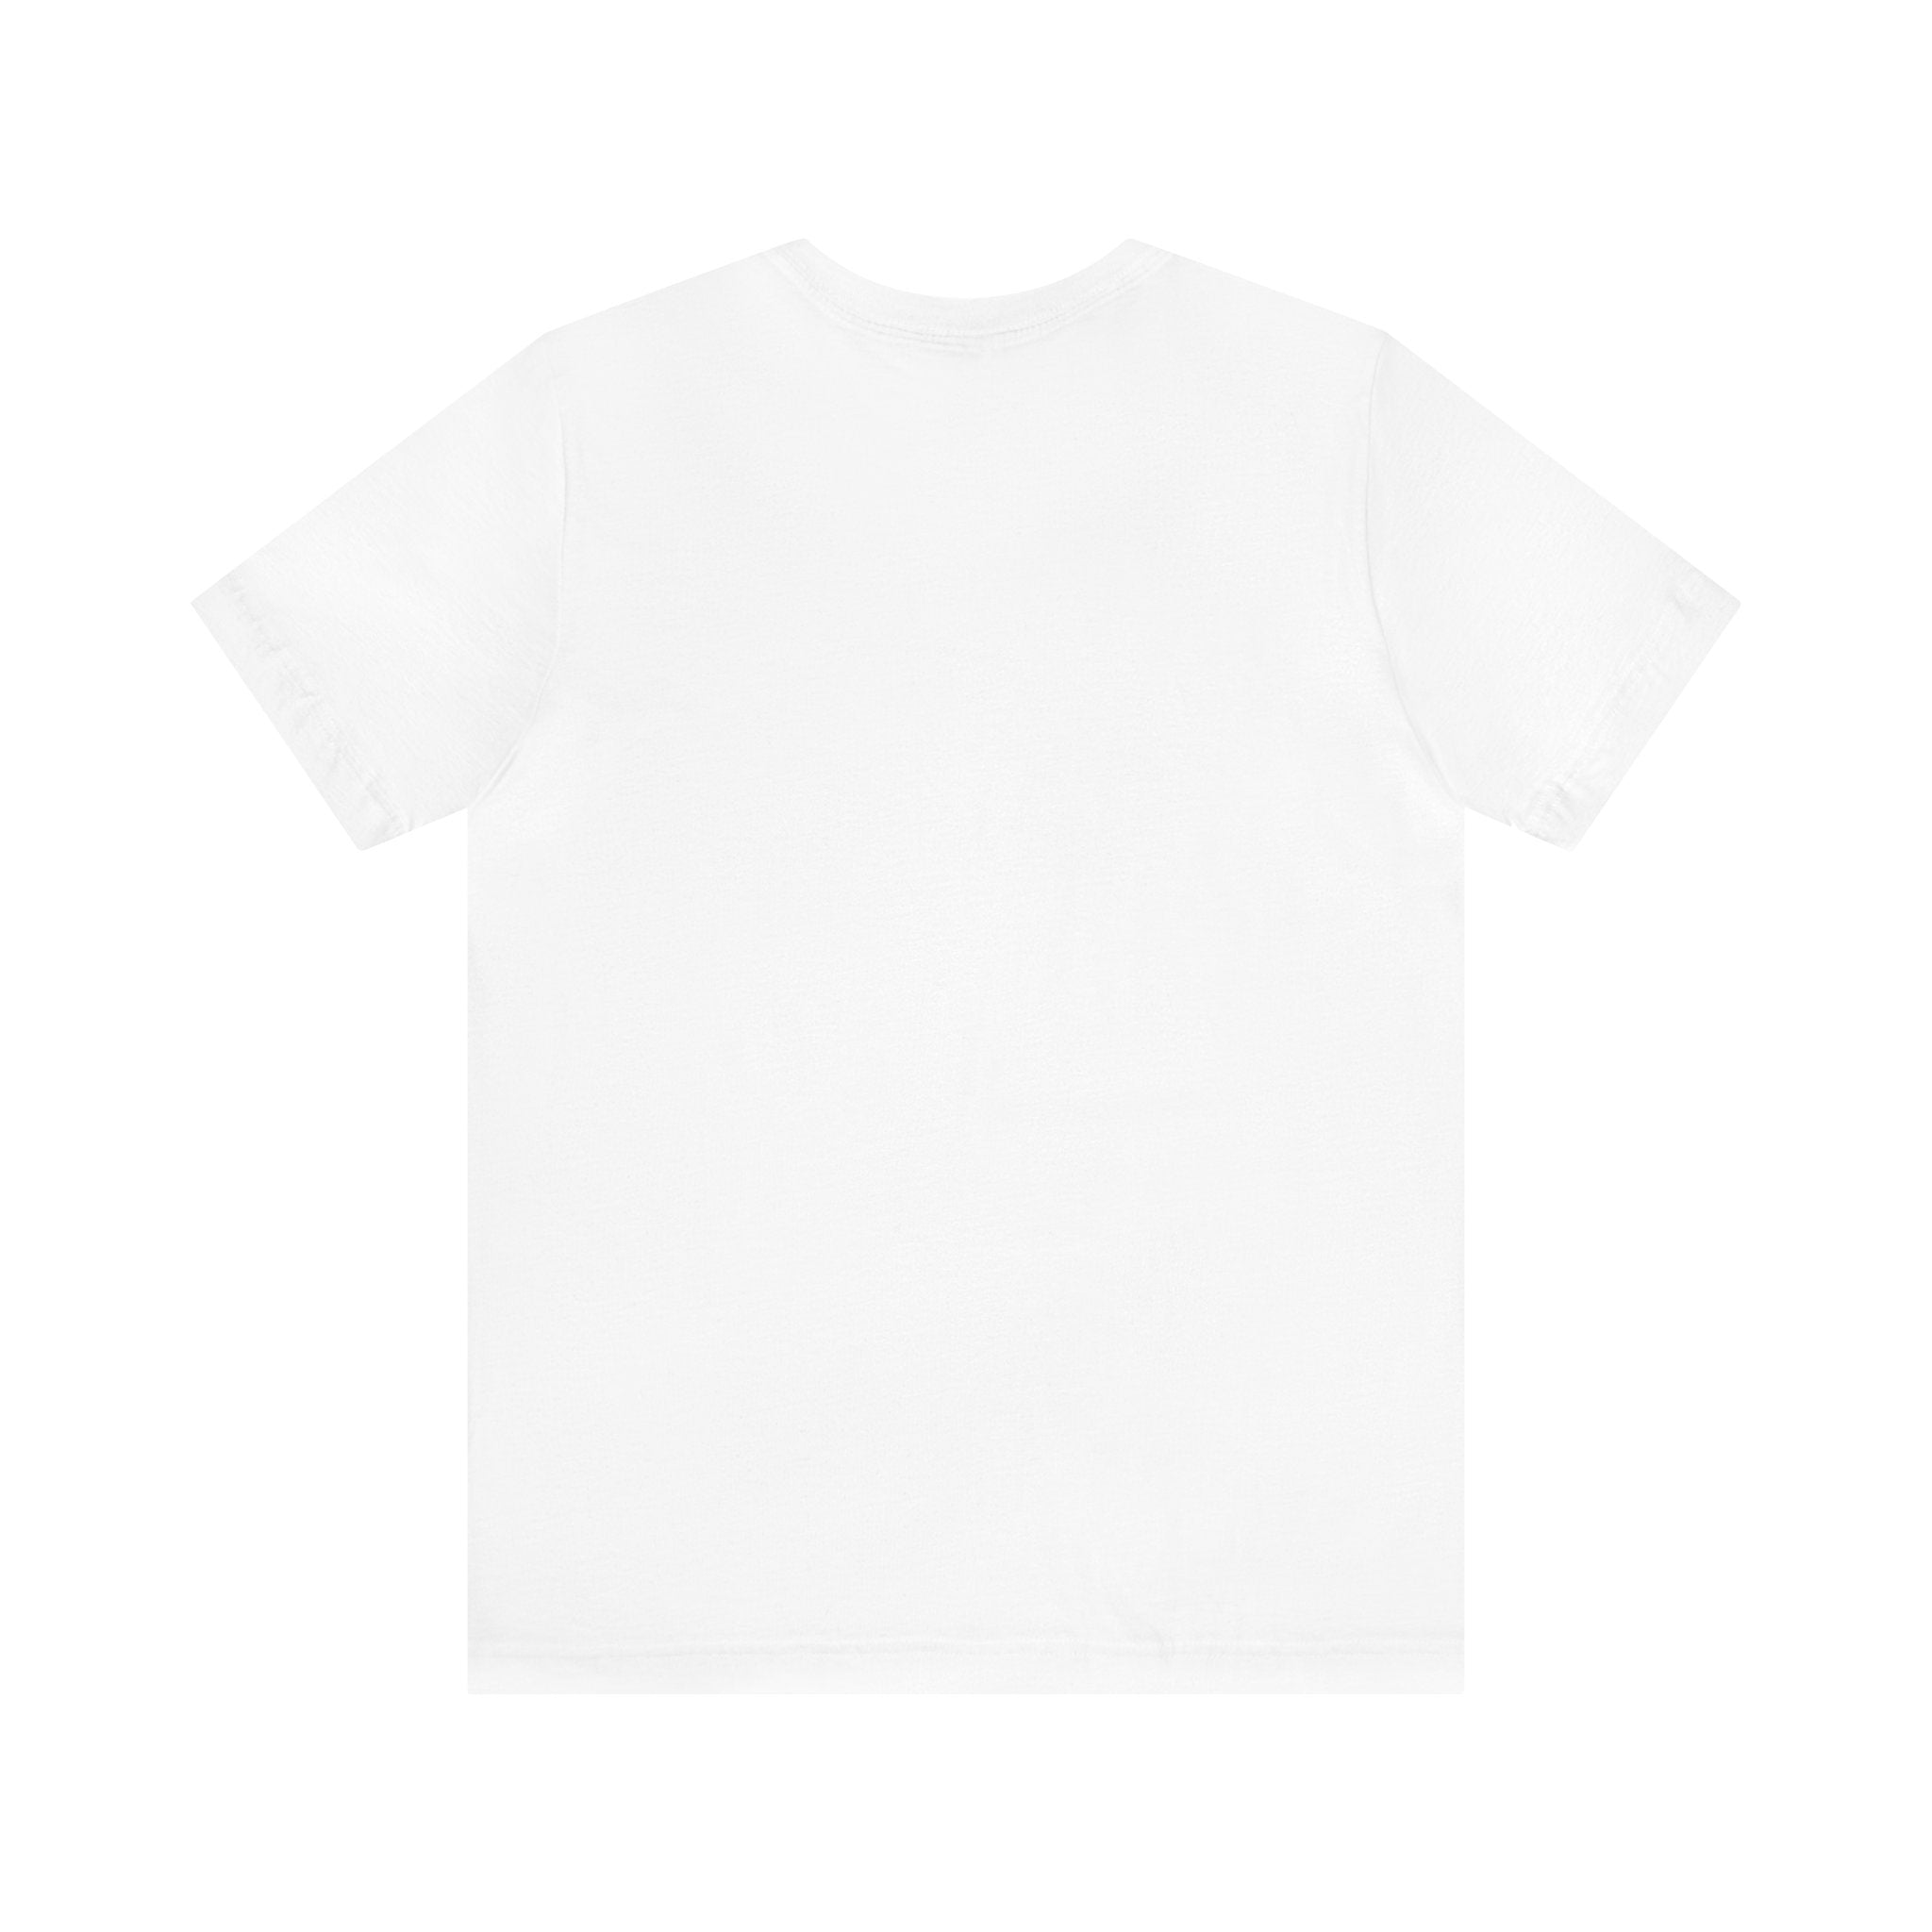 Holy Hodograph Tee 